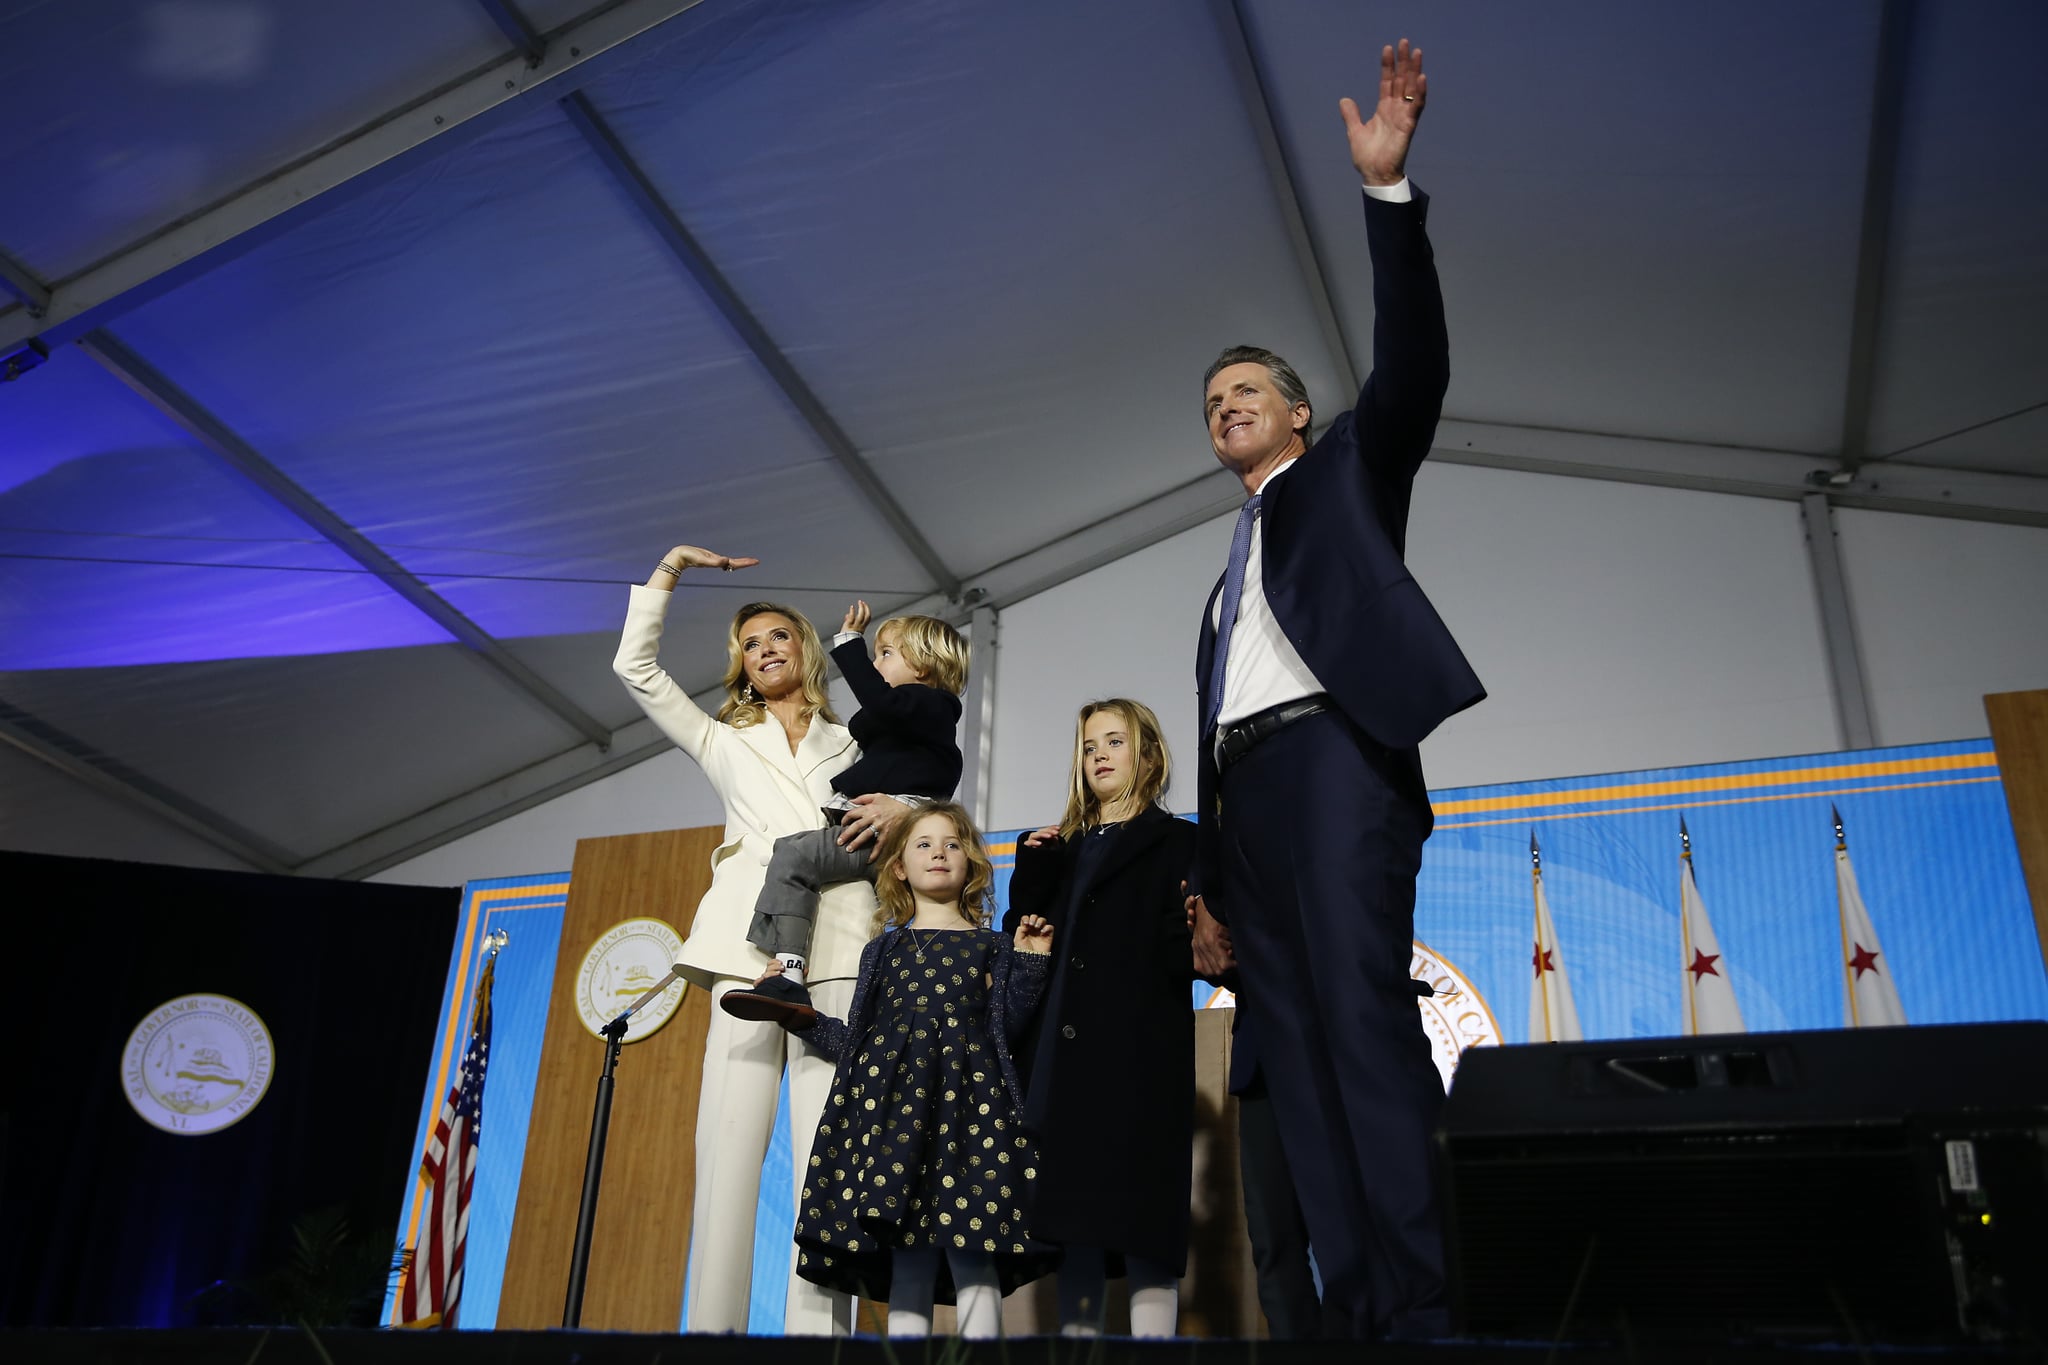 SACRAMENTO, CA - JANUARY 07: Governor Gavin Newsom gestures to the crowd alongside wife Jennifer Siebel Newsom and children (L-R) Dutch, Montana, and Brooklynn on January 7, 2019 in Sacramento, California. Gavin Newsom will begin his first term as the 40th governor of California after serving as the 42nd Mayor of San Francisco as well as Lieutenant Governor of California since 2010 alongside outgoing governor Jerry Brown (Photo by Stephen Lam/Getty Images)